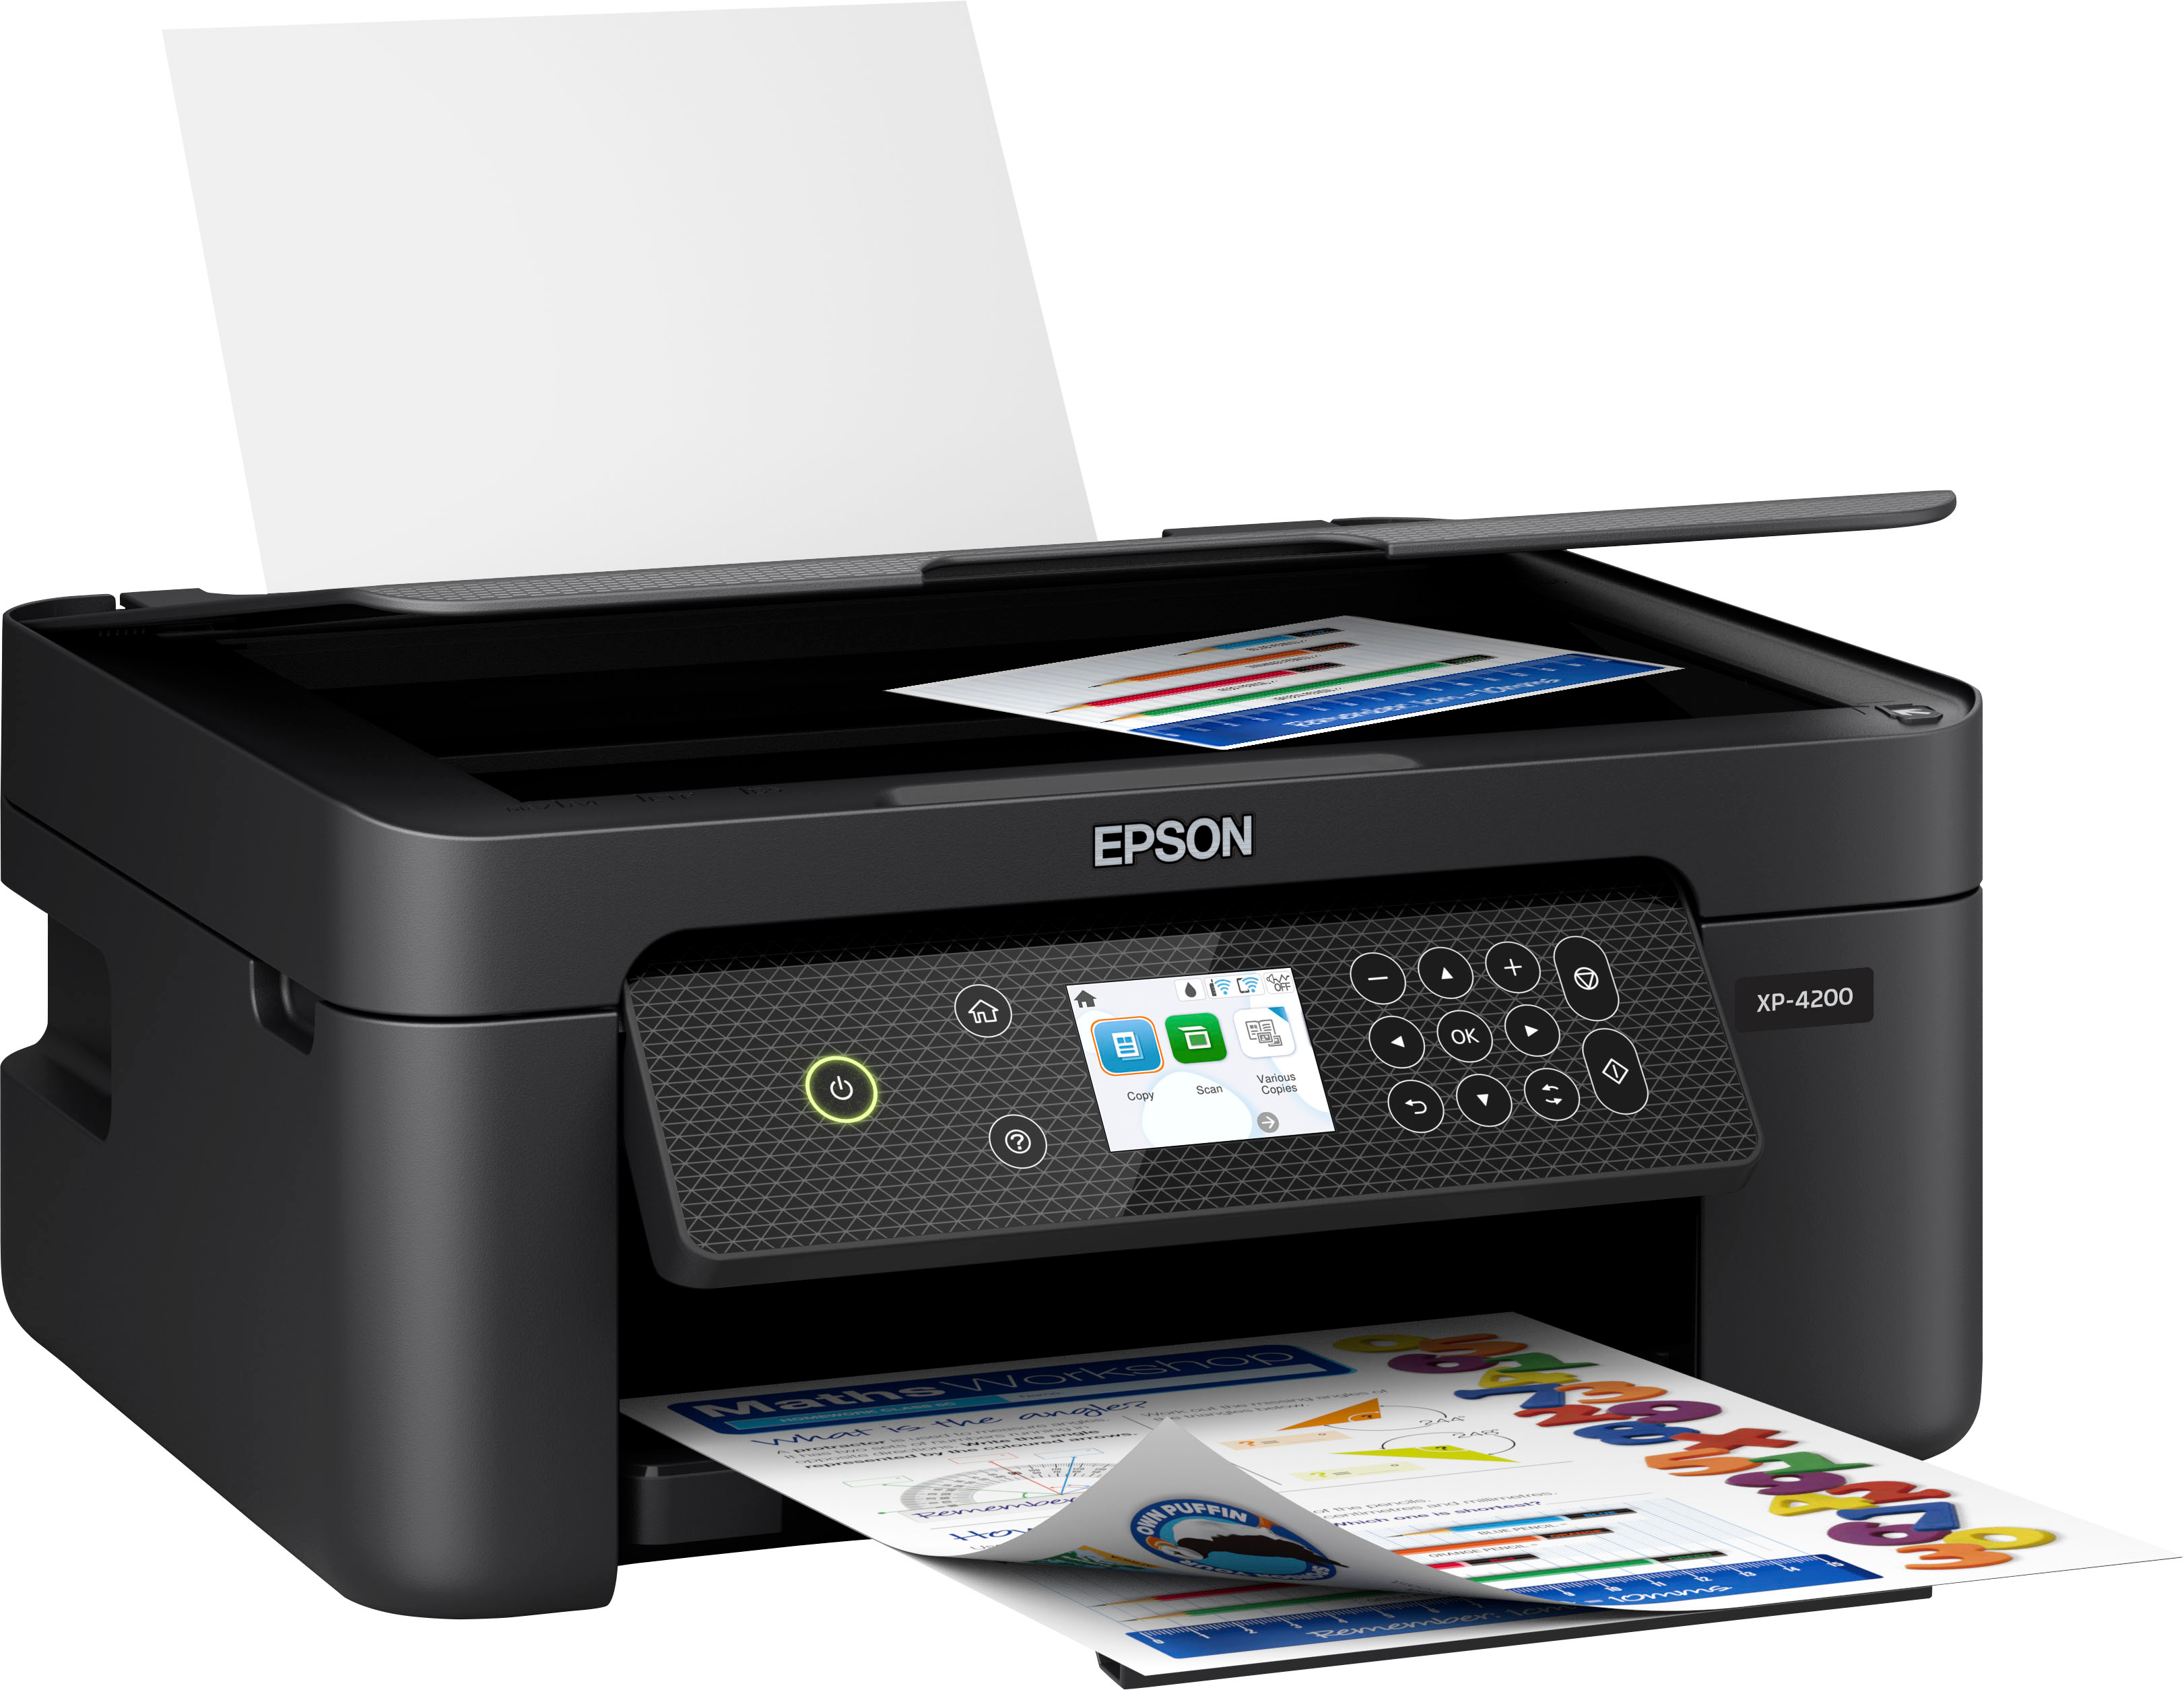 Angle View: Epson - Expression Home XP-4200 All-in-One Inkjet Printer - Black